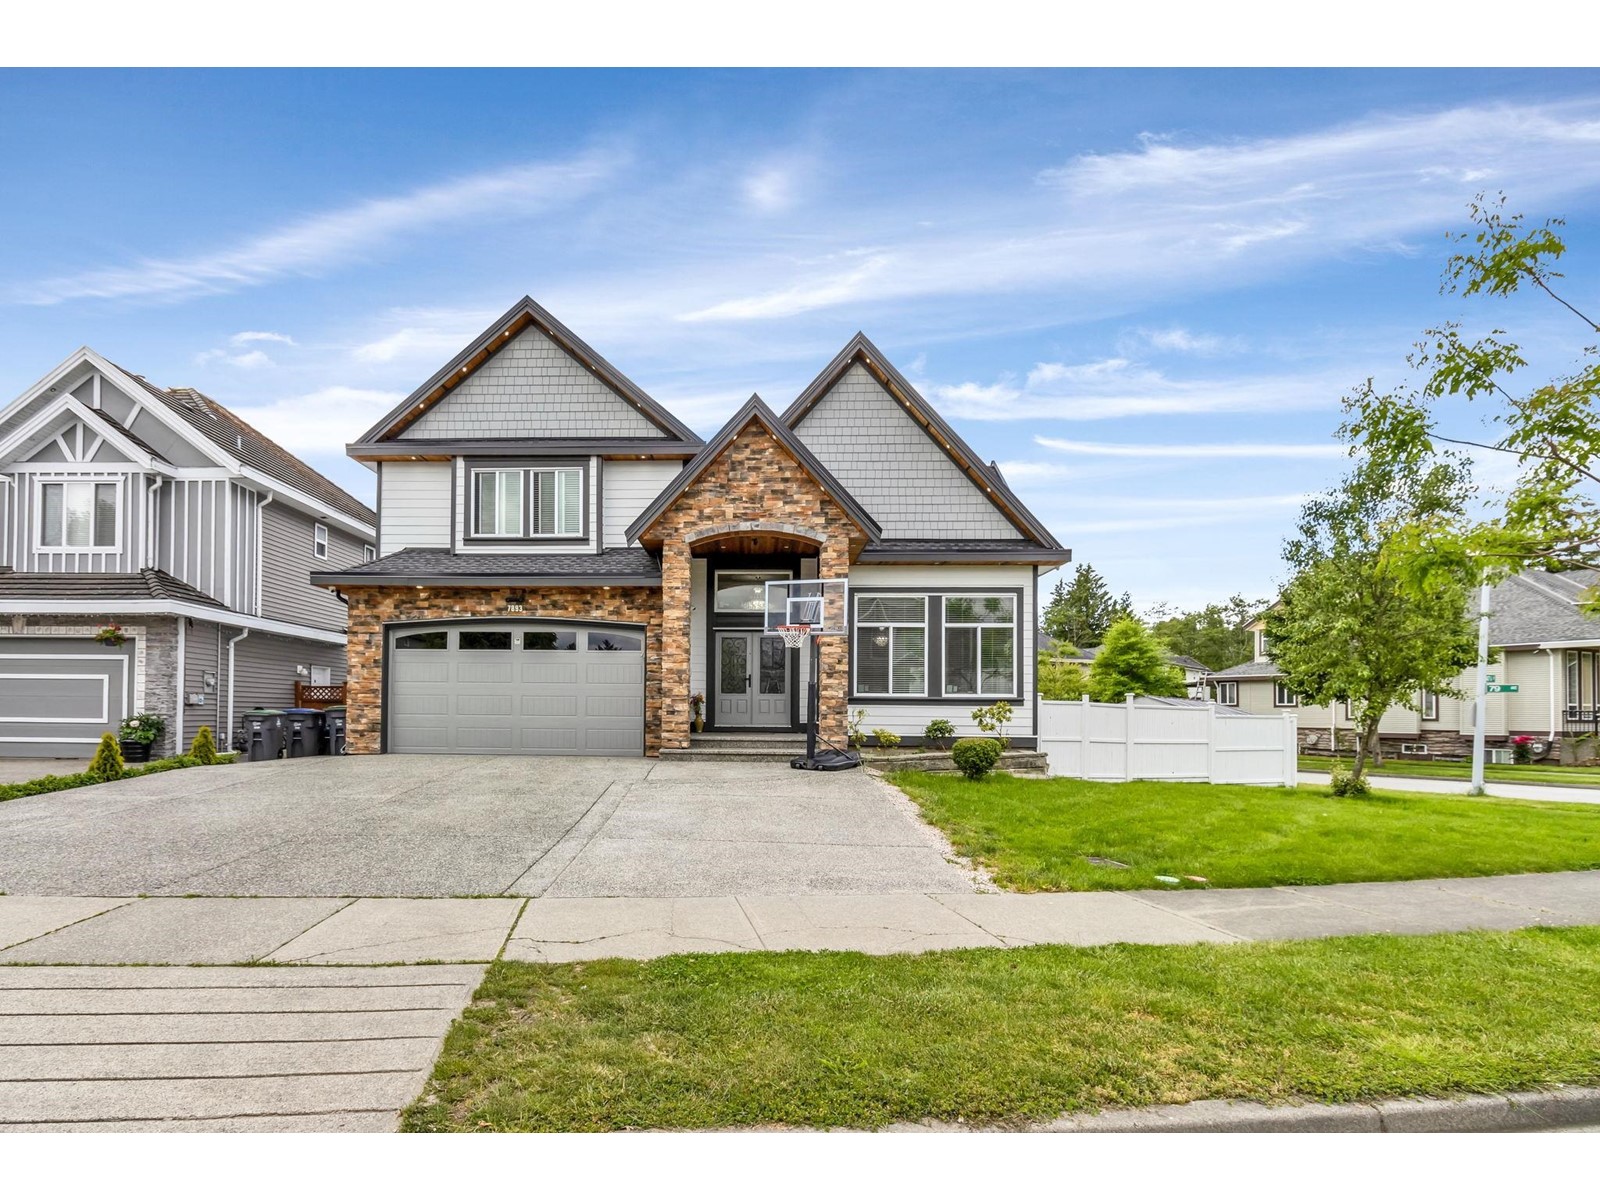 7893 147A STREET located in Surrey, British Columbia